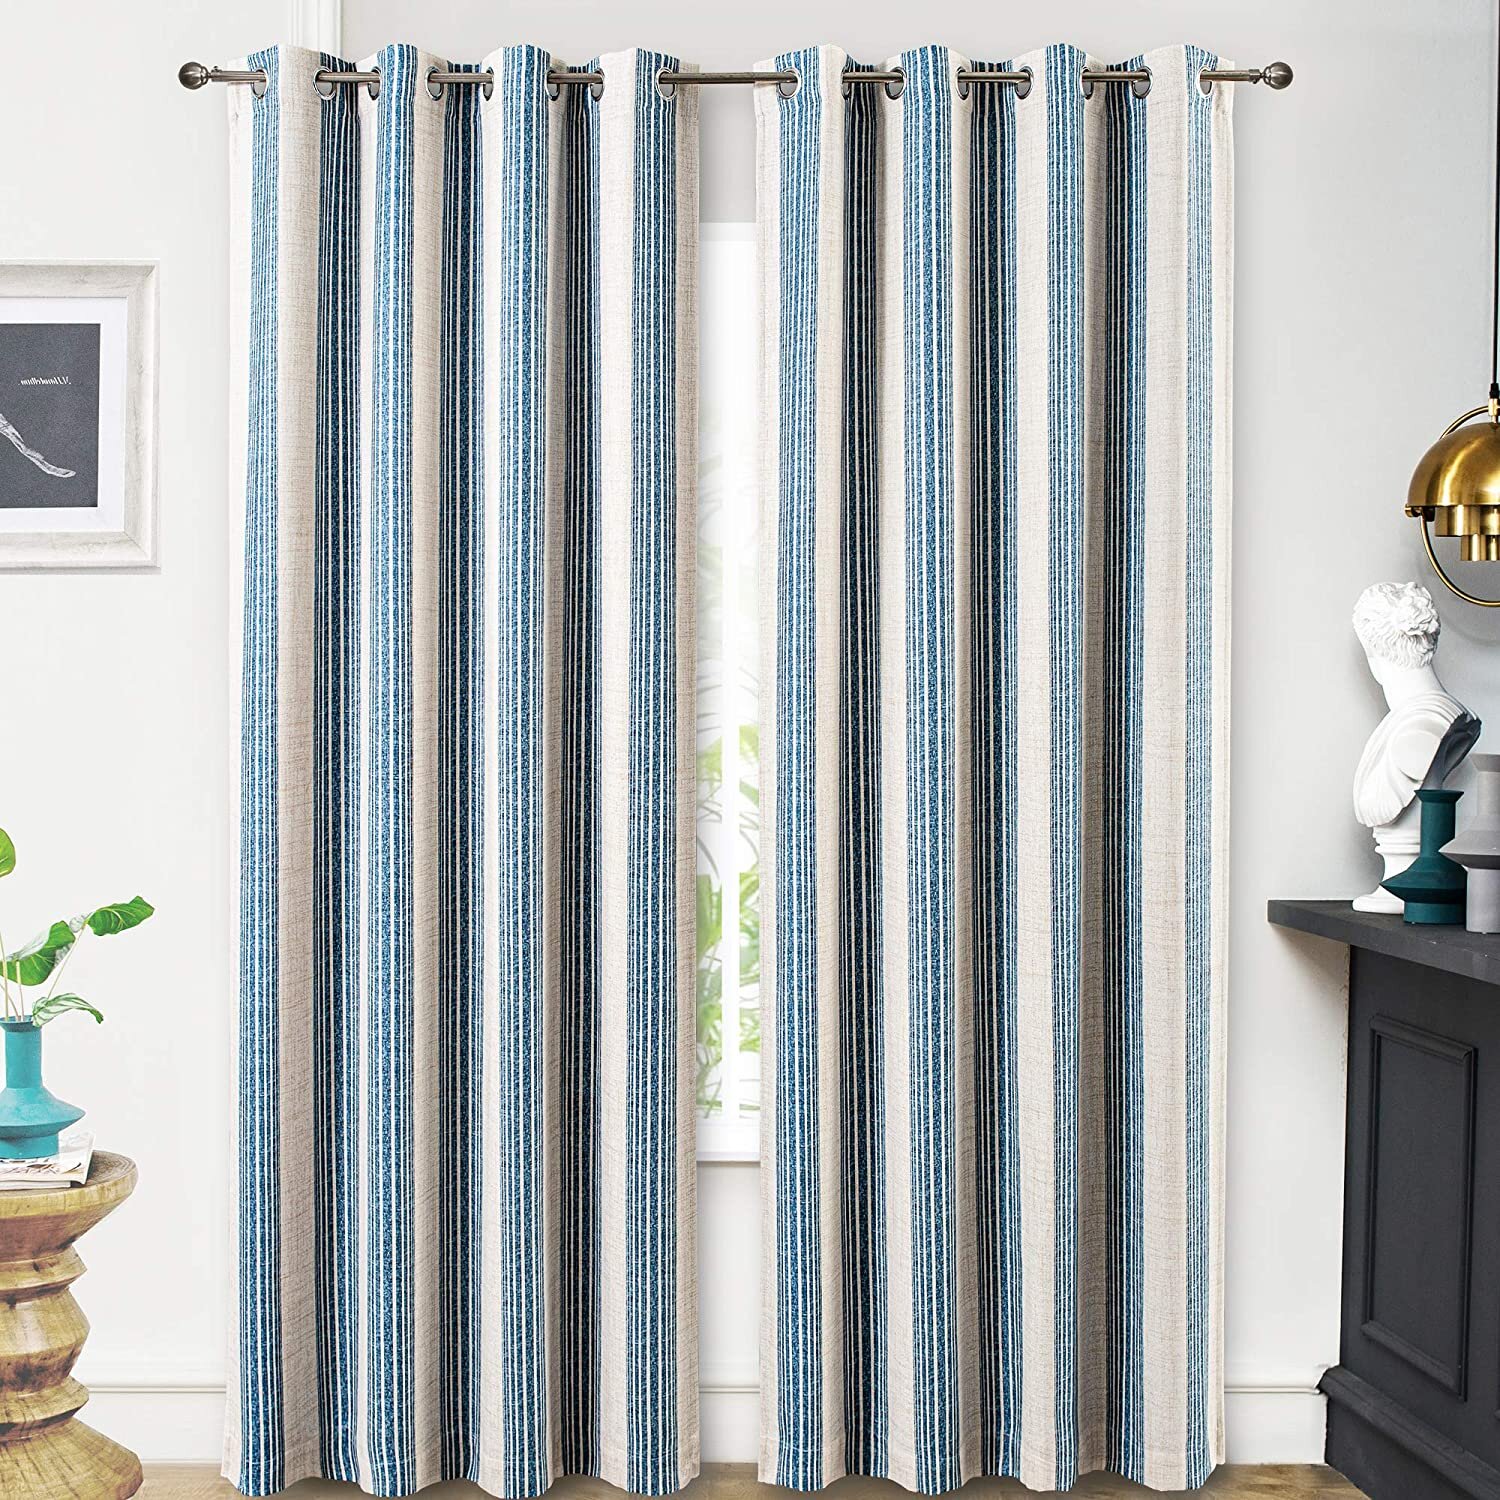 QUALITY BLOCKOUT EYELET CURTAINS Room Darkening Double Side Pattern 